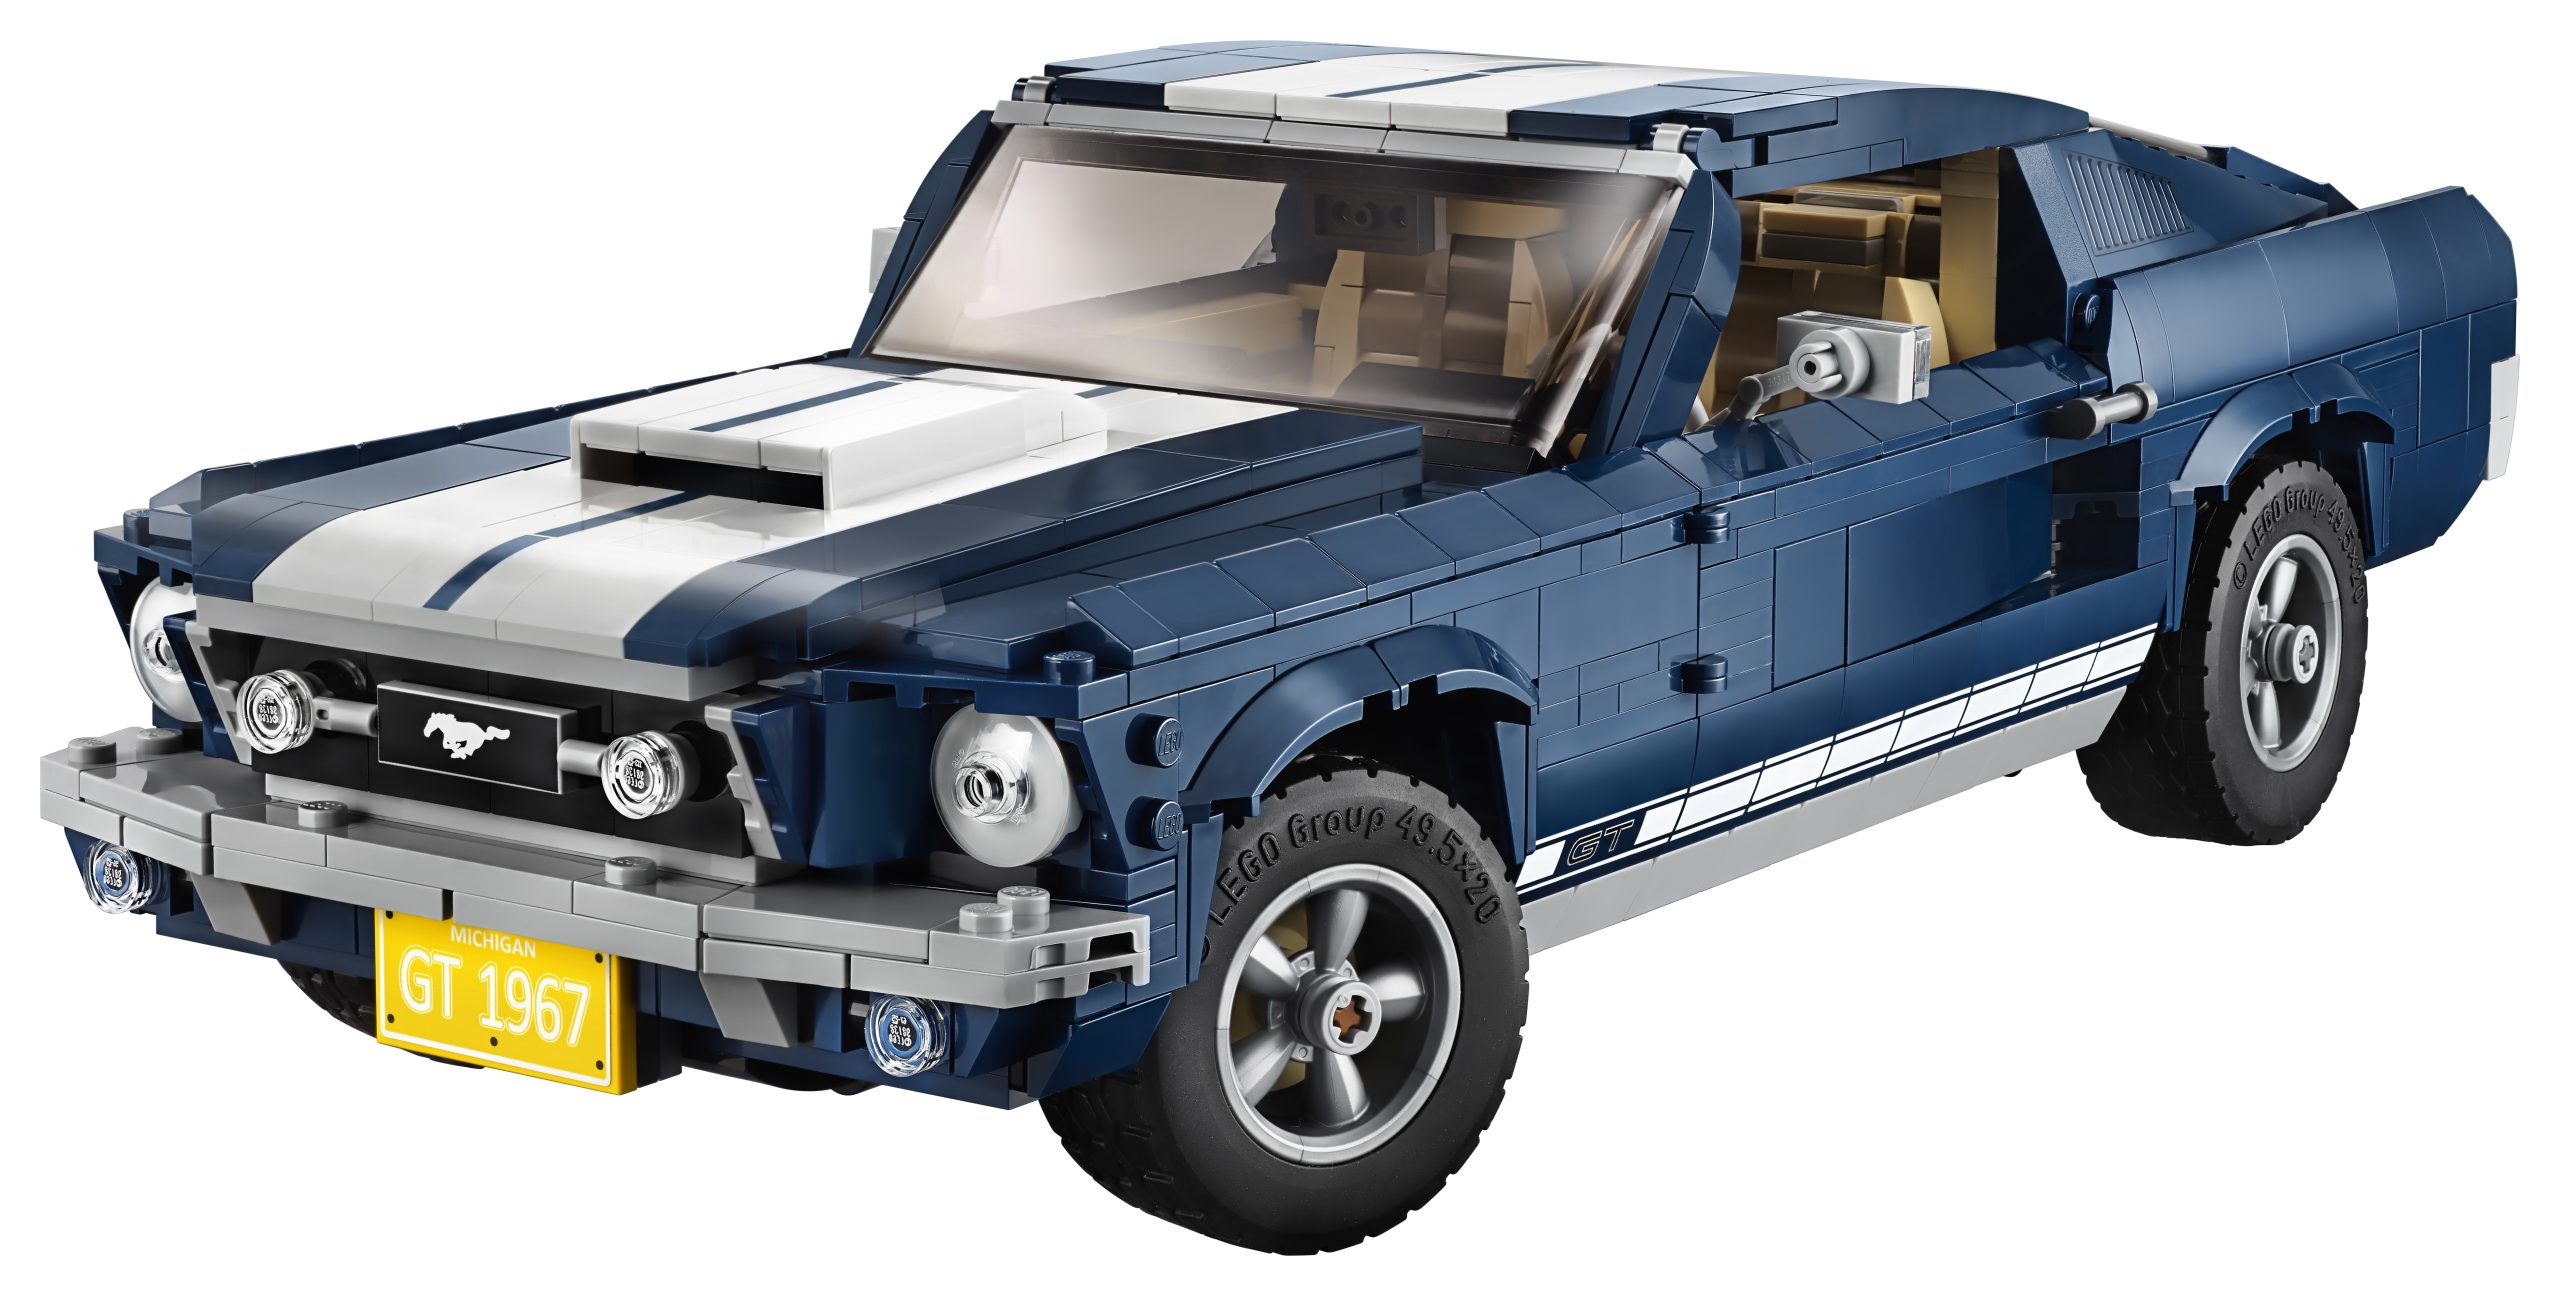 A true American hero will soon be screeching into stores with the arrival of the LEGO Creator Expert Ford Mustang from March 1.